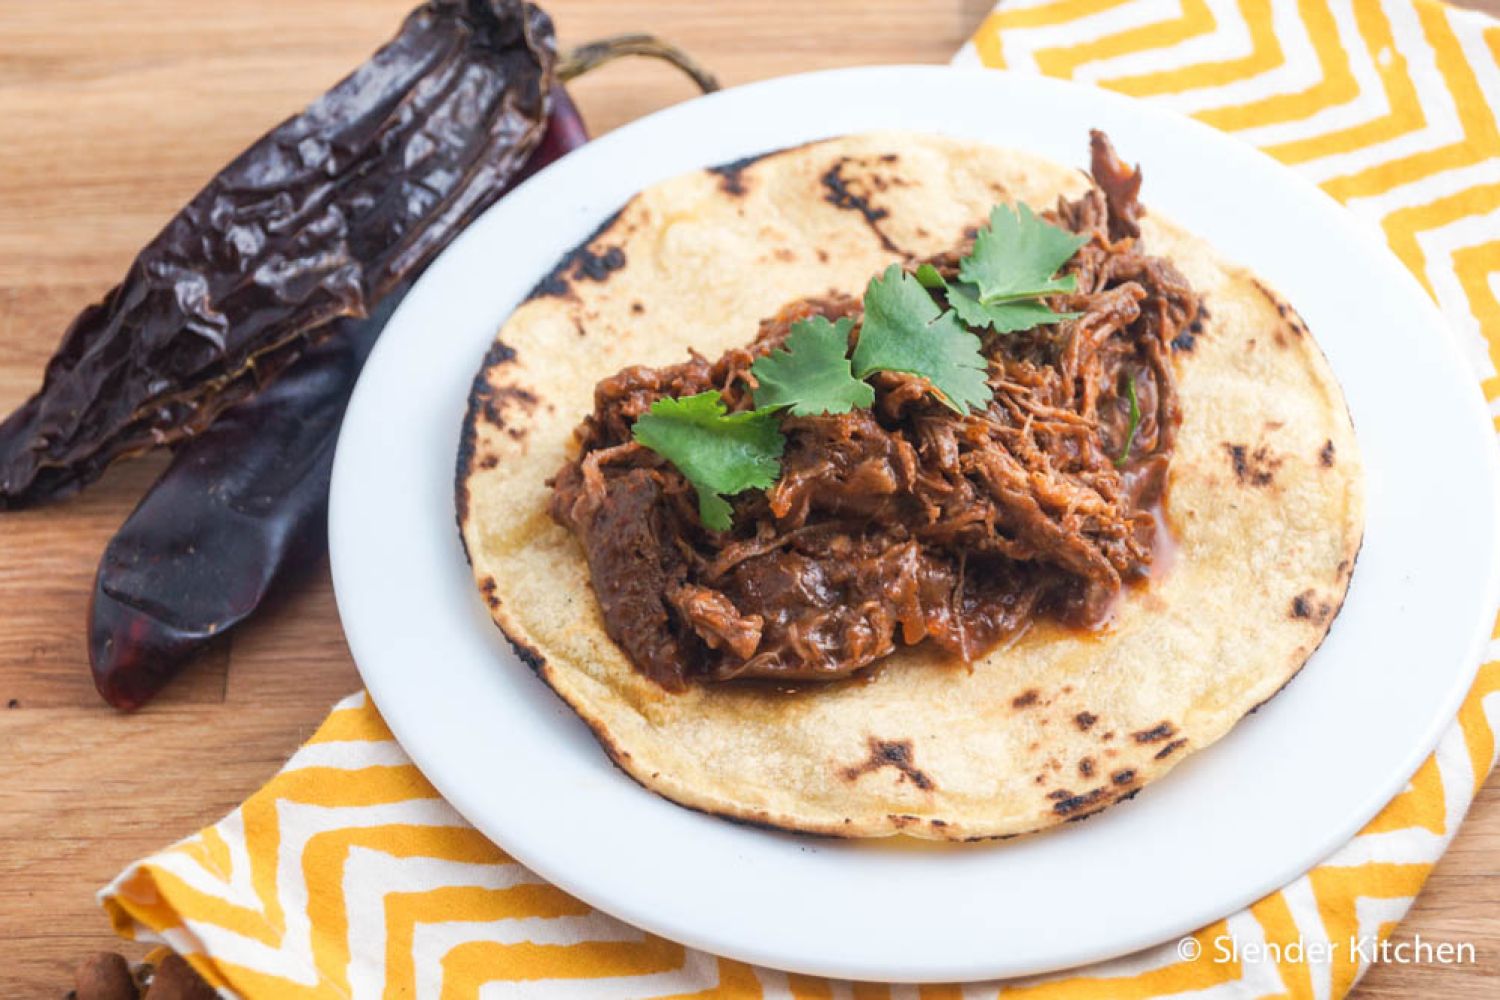 Slow cooker beef adobado with shredded beef in a red chile sauce served in a corn tortilla.